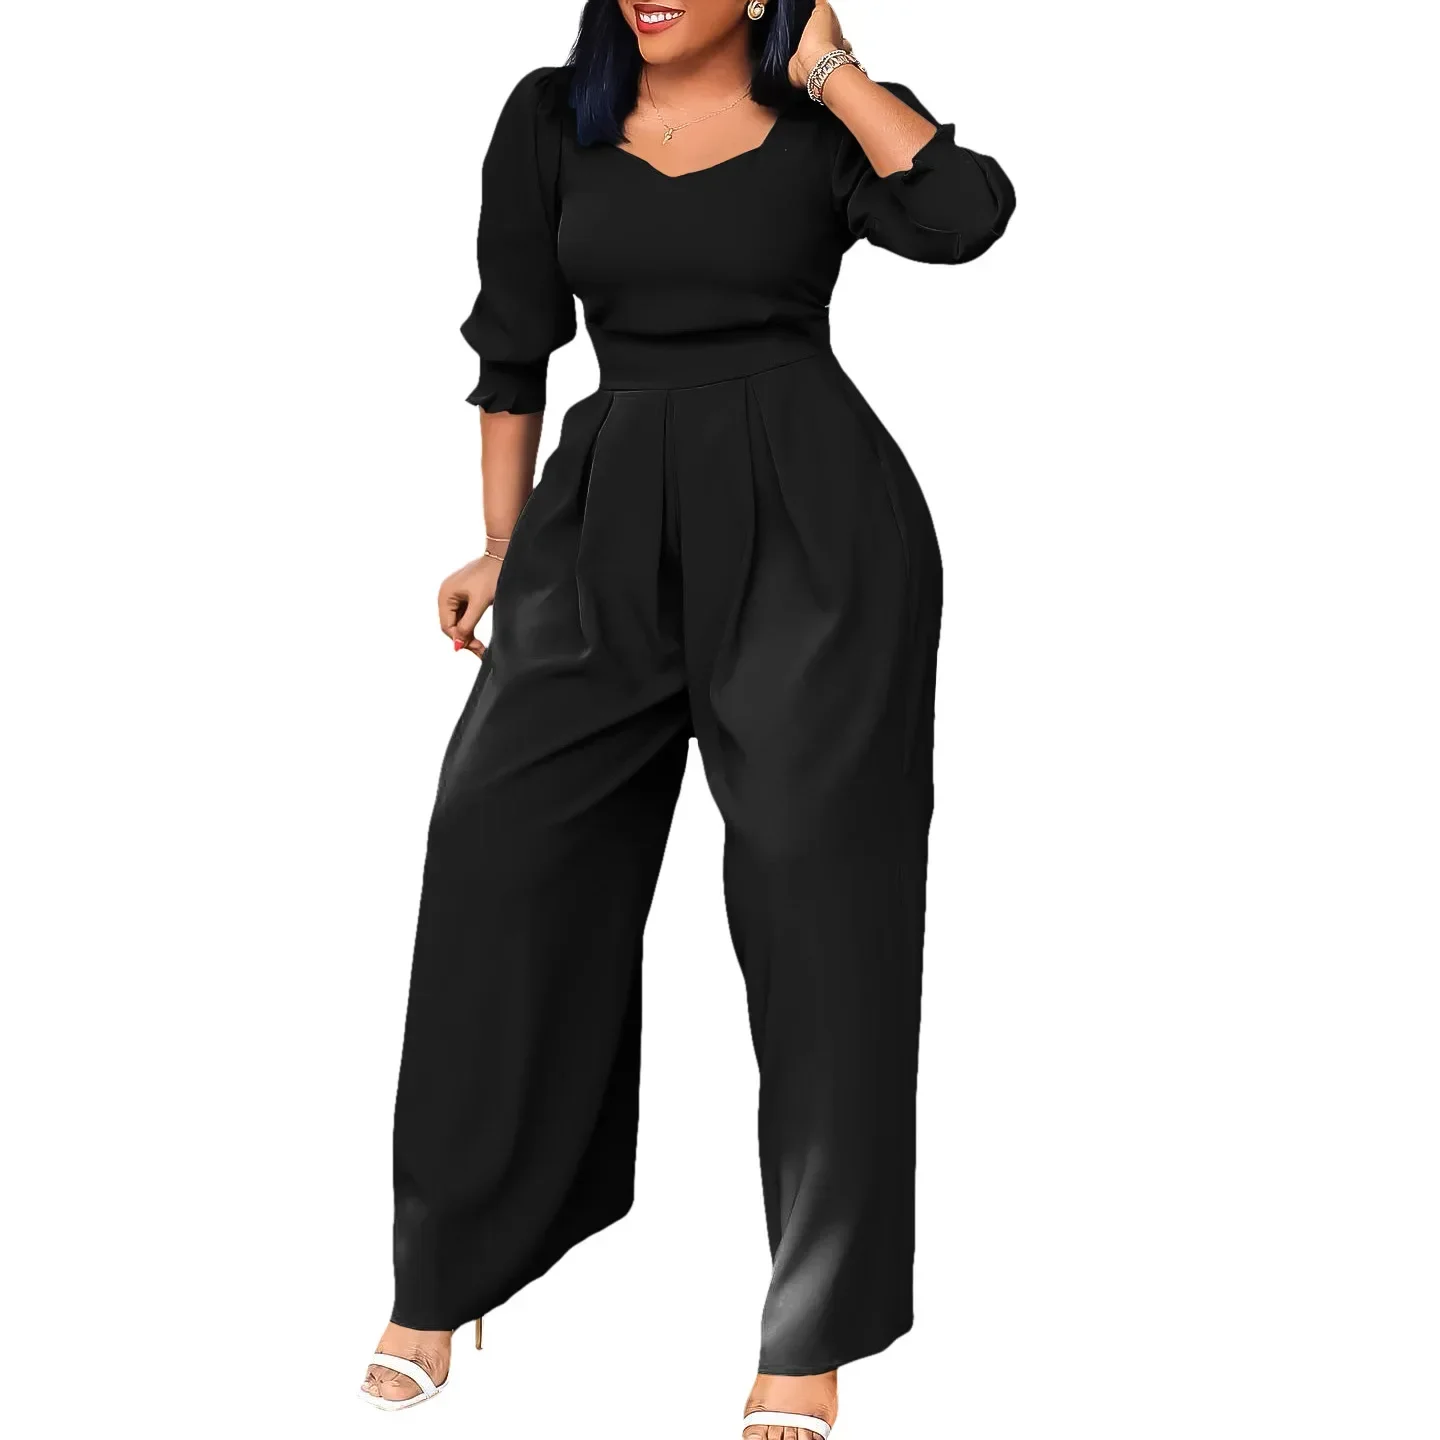 African Loose Jumpsuit Women Fashion Streetwear Jumpsuits Ladies Outfits Mamelucos Mujer Wide Leg Classy Party One Piece Romper